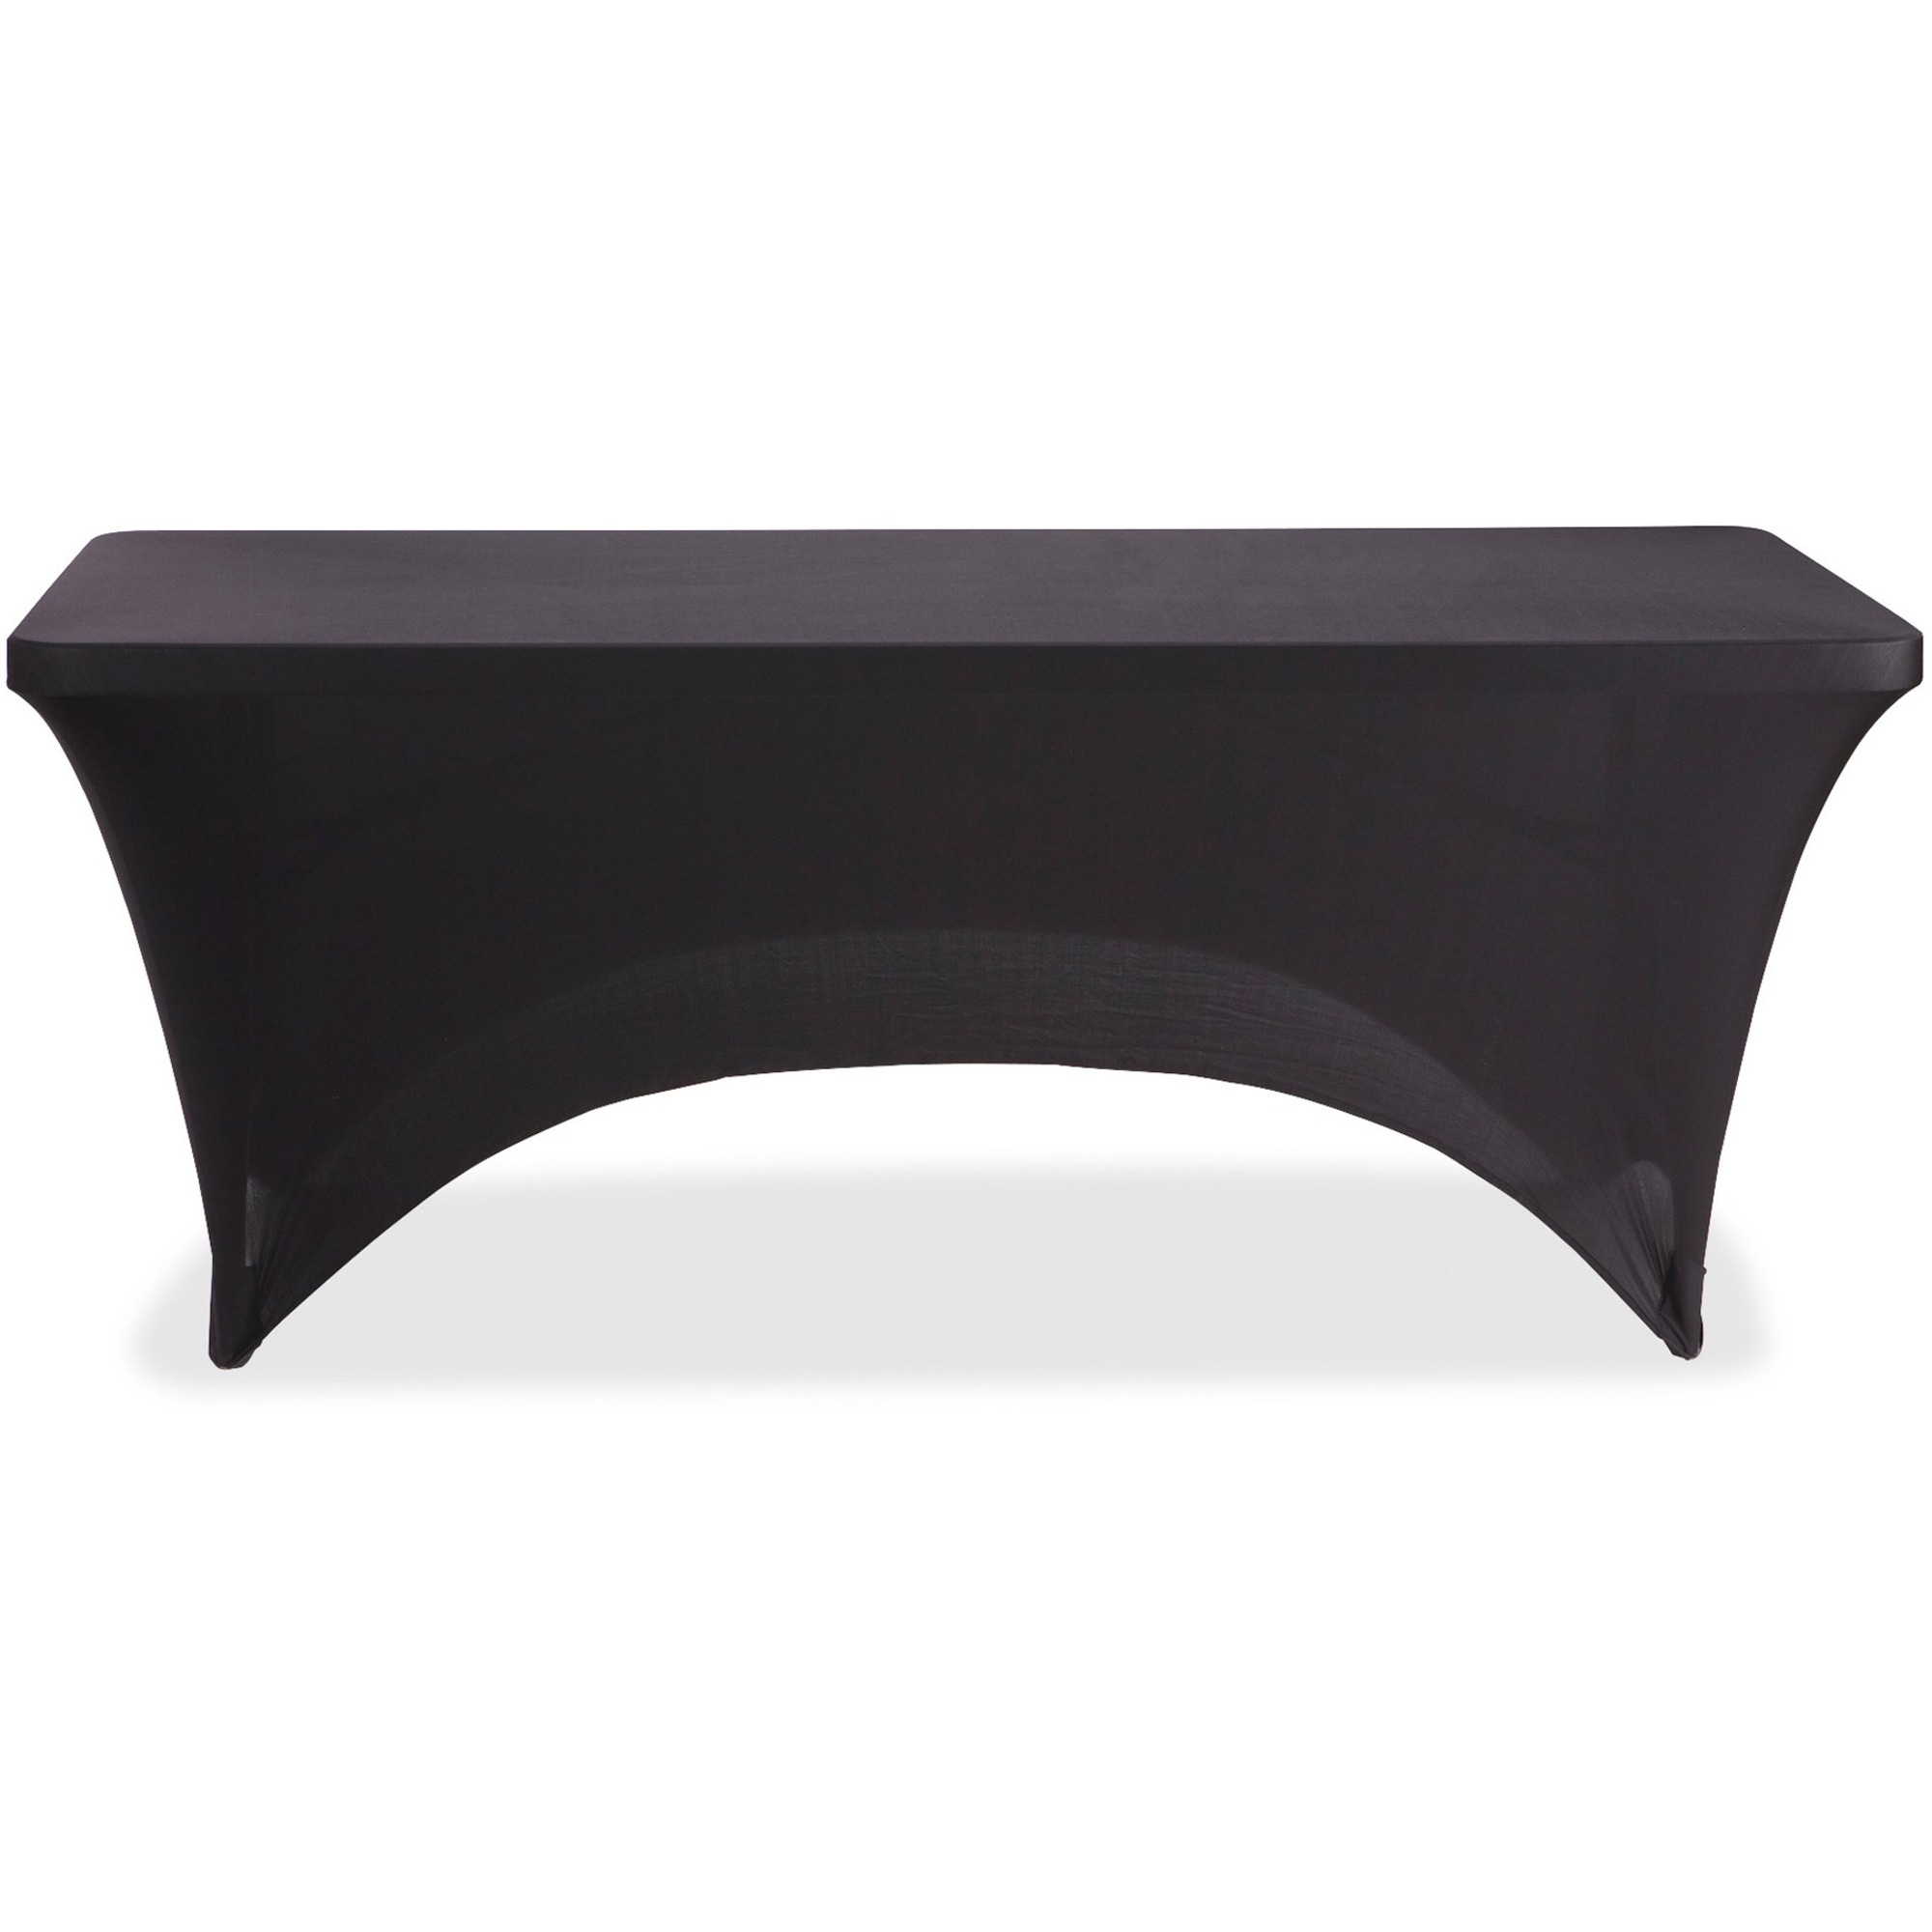 Iceberg Stretchable Table Covers Madill The Office Company